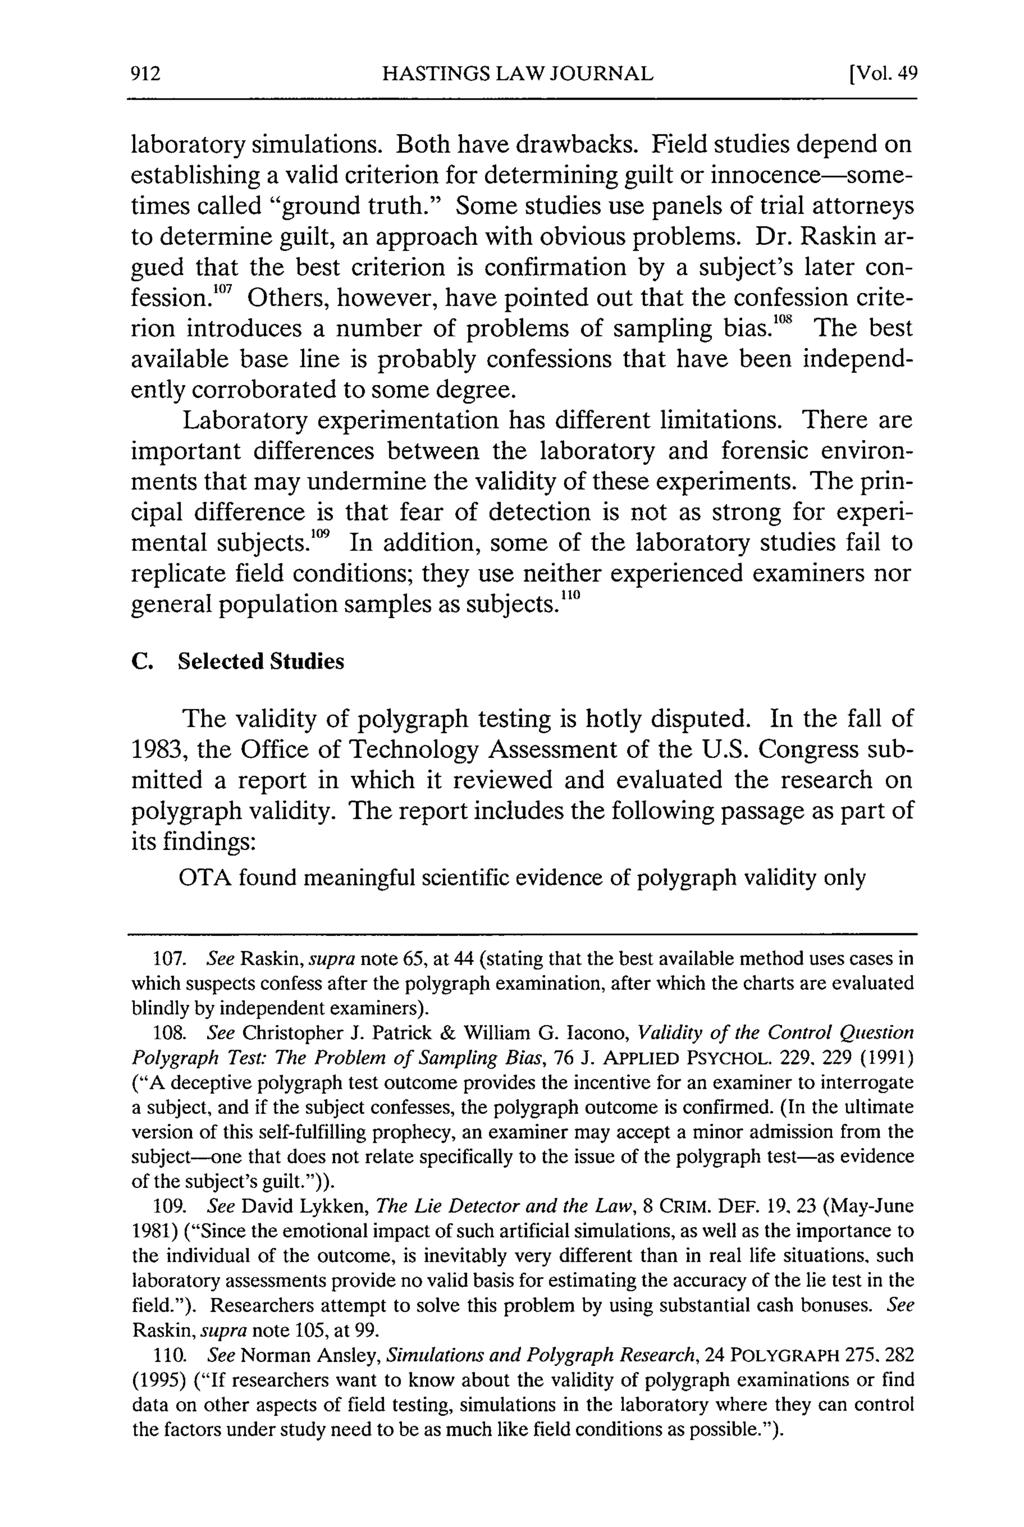 HASTINGS LAW JOURNAL [Vol. 49 laboratory simulations. Both have drawbacks. Field studies depend on establishing a valid criterion for determining guilt or innocence-sometimes called "ground truth.